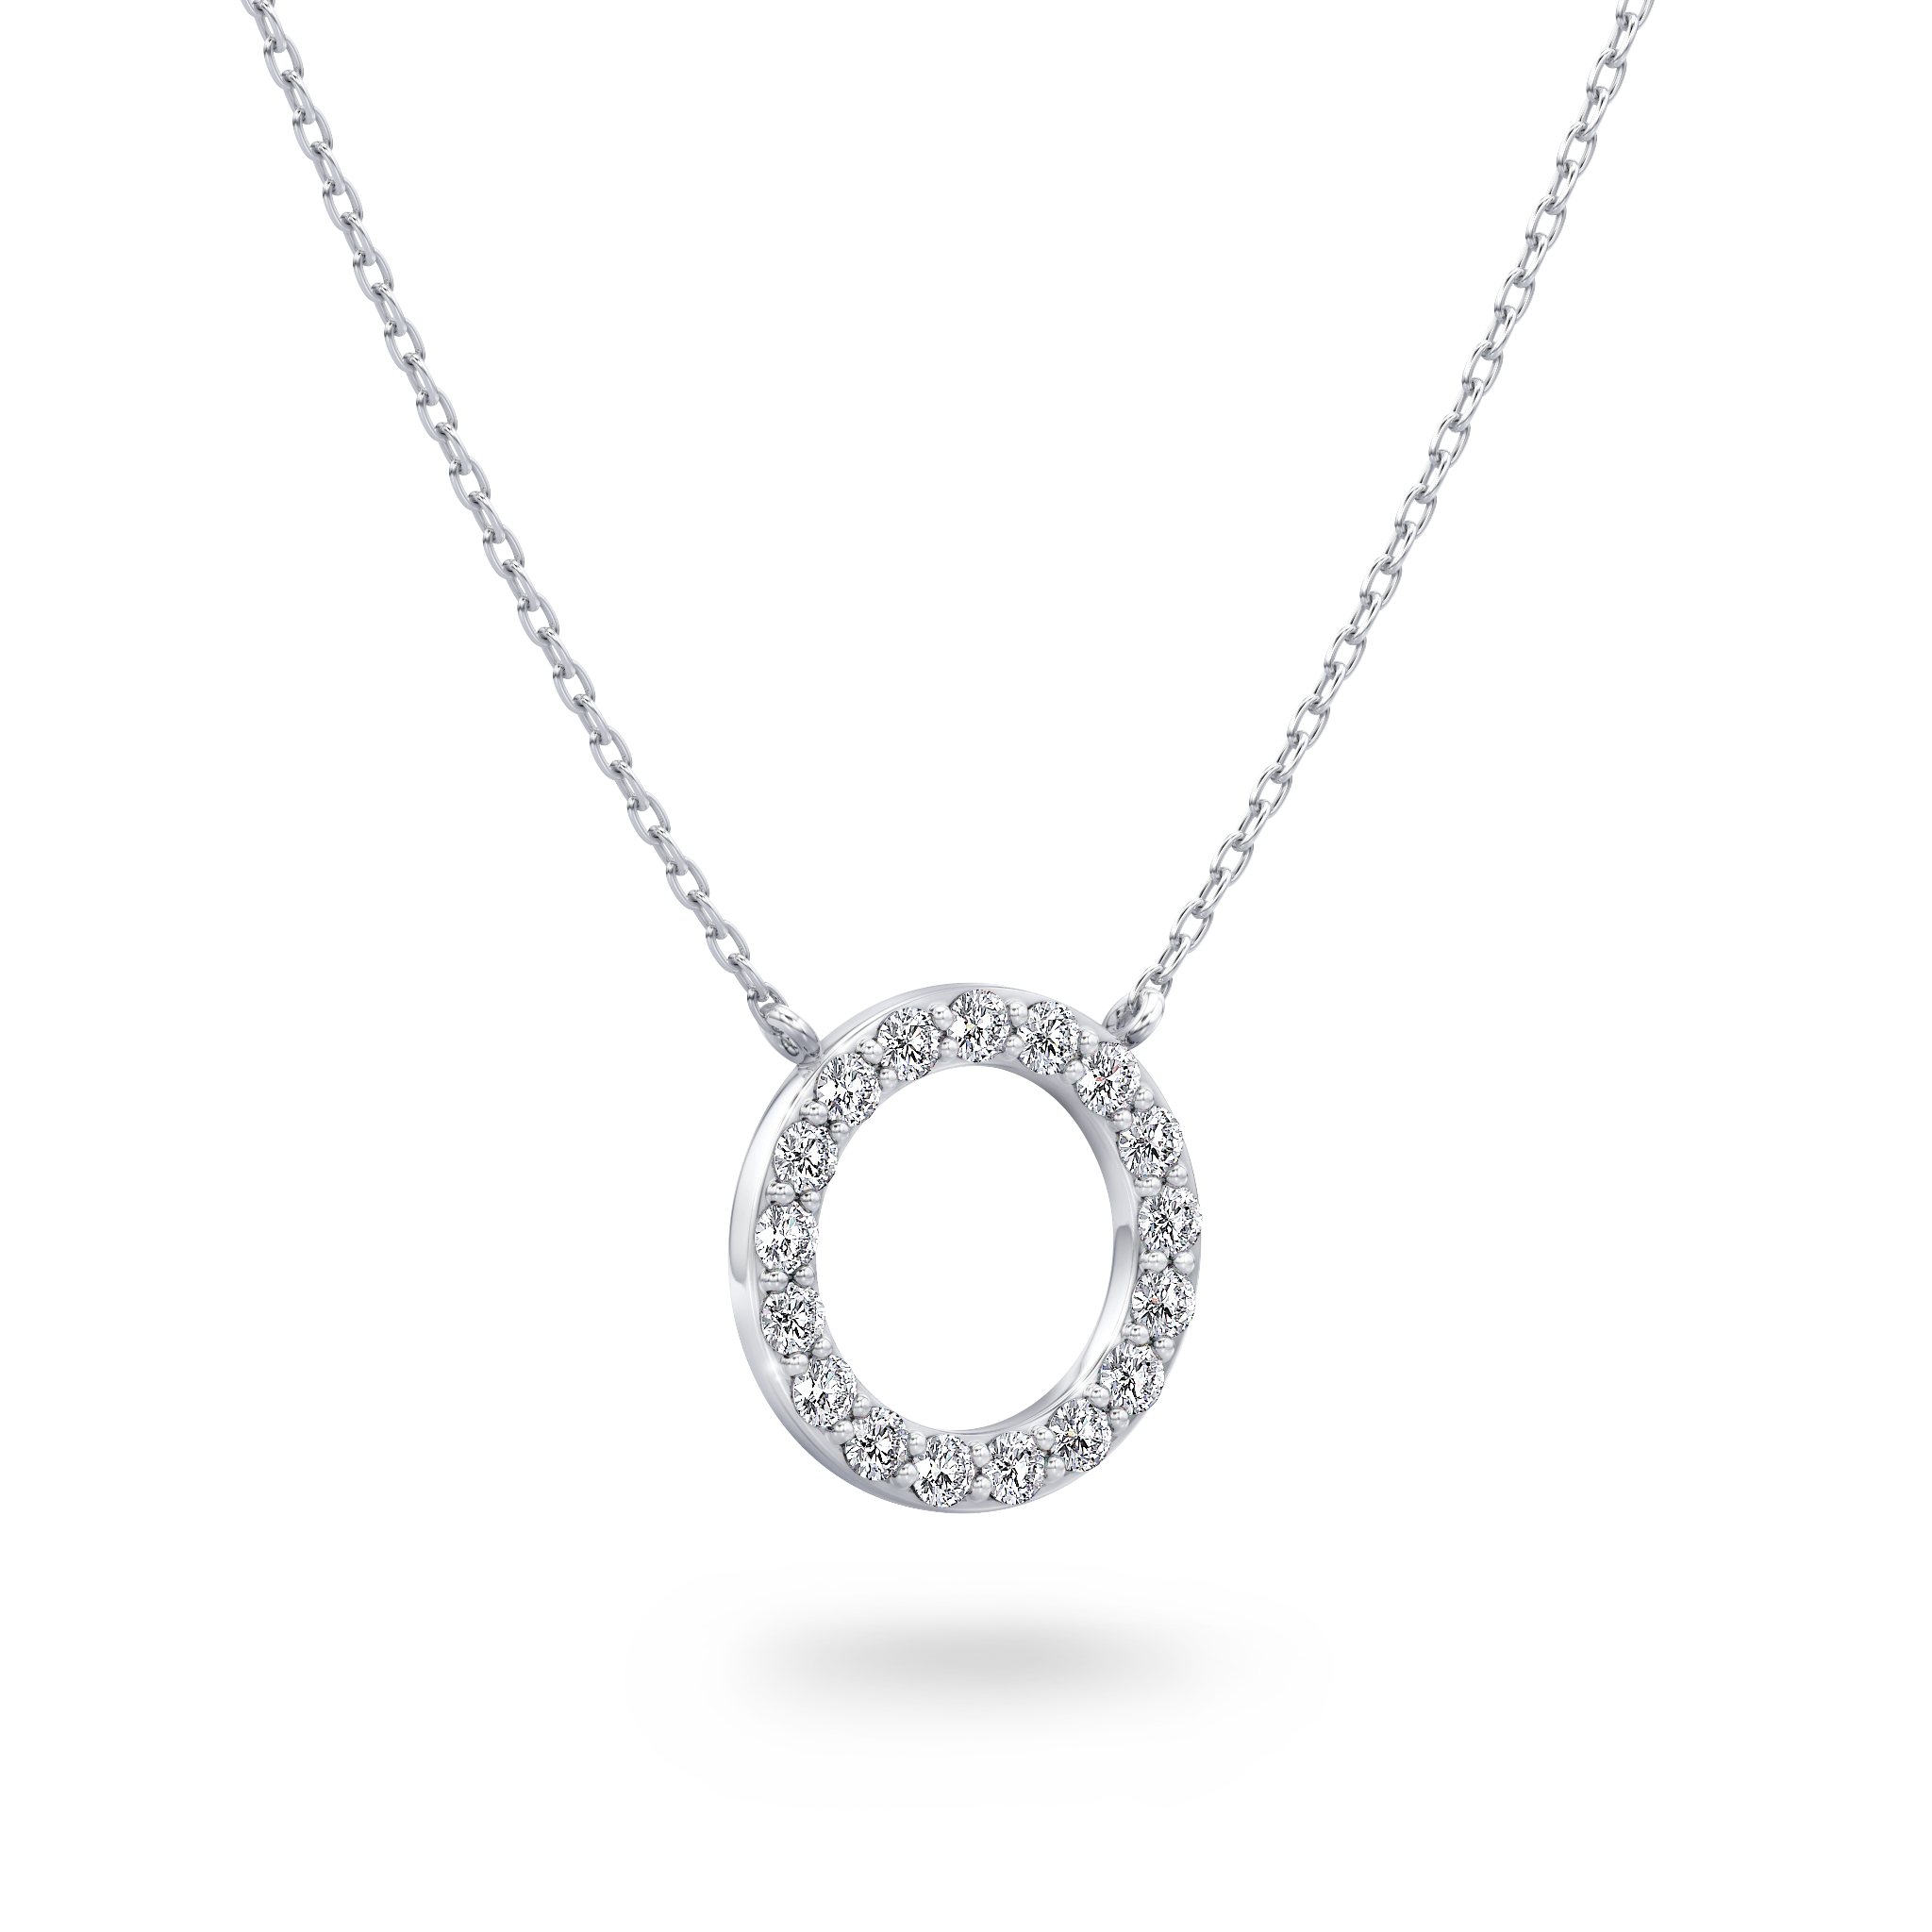 Shimansky - Circle of Life Microset Diamond Necklace crafted in 14K White Gold